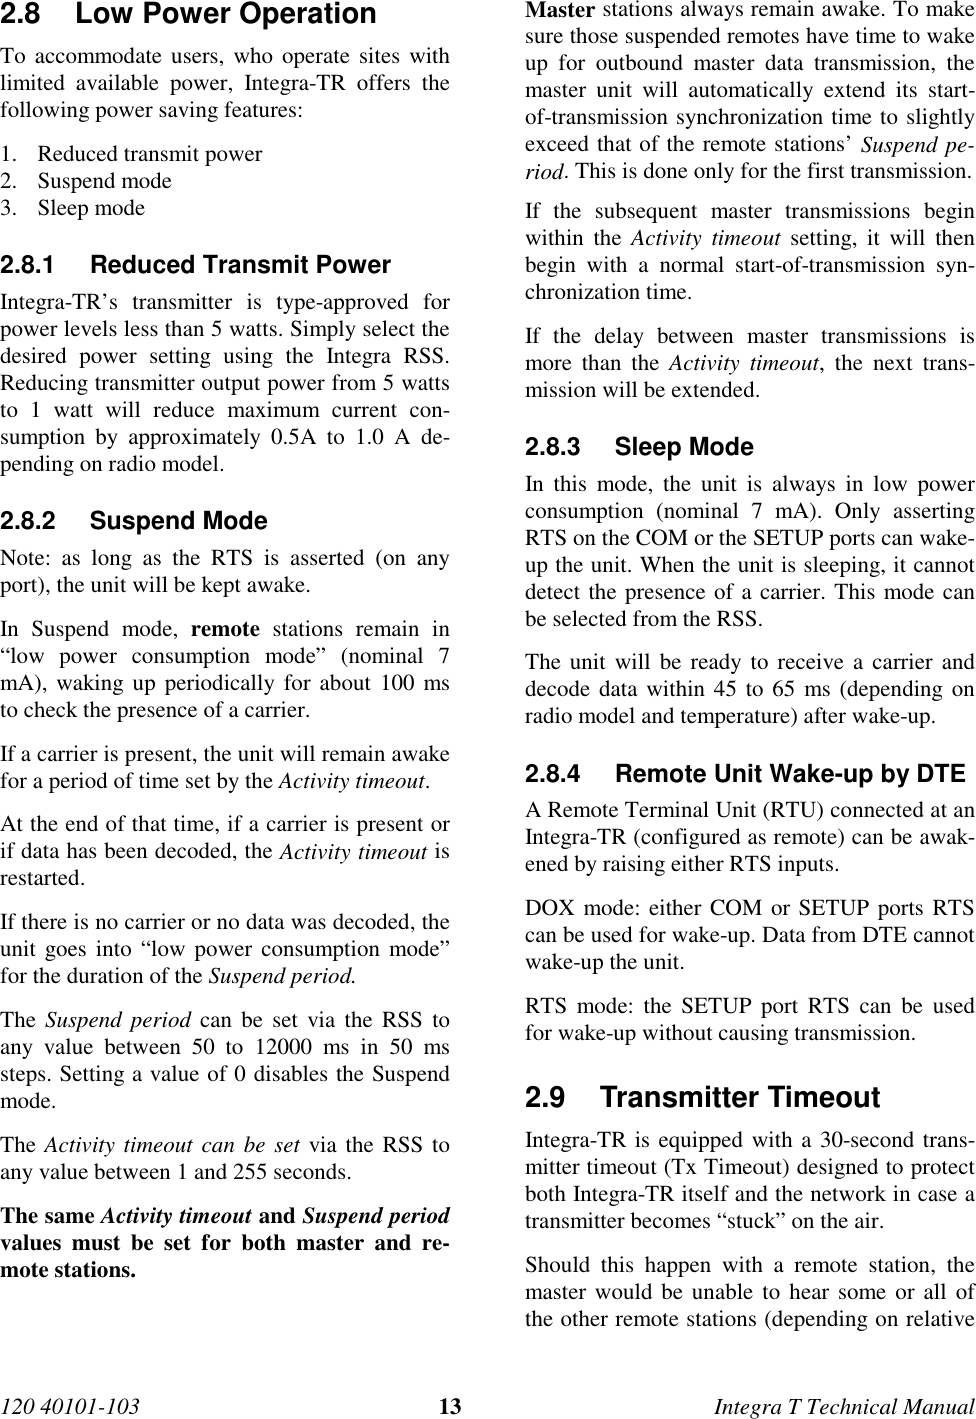 120 40101-103 13 Integra T Technical Manual2.8  Low Power Operation To accommodate users, who operate sites withlimited available power, Integra-TR offers thefollowing power saving features:1. Reduced transmit power2. Suspend mode3. Sleep mode2.8.1  Reduced Transmit Power Integra-TR’s transmitter is type-approved forpower levels less than 5 watts. Simply select thedesired power setting using the Integra RSS.Reducing transmitter output power from 5 wattsto 1 watt will reduce maximum current con-sumption by approximately 0.5A to 1.0 A de-pending on radio model.2.8.2 Suspend ModeNote: as long as the RTS is asserted (on anyport), the unit will be kept awake. In Suspend mode, remote stations remain in“low power consumption mode” (nominal 7mA), waking up periodically for about 100 msto check the presence of a carrier. If a carrier is present, the unit will remain awakefor a period of time set by the Activity timeout. At the end of that time, if a carrier is present orif data has been decoded, the Activity timeout isrestarted. If there is no carrier or no data was decoded, theunit goes into “low power consumption mode”for the duration of the Suspend period. The Suspend period can be set via the RSS toany value between 50 to 12000 ms in 50 mssteps. Setting a value of 0 disables the Suspendmode. The Activity timeout can be set via the RSS toany value between 1 and 255 seconds. The same Activity timeout and Suspend periodvalues must be set for both master and re-mote stations.  Master stations always remain awake. To makesure those suspended remotes have time to wakeup for outbound master data transmission, themaster unit will automatically extend its start-of-transmission synchronization time to slightlyexceed that of the remote stations’ Suspend pe-riod. This is done only for the first transmission. If the subsequent master transmissions beginwithin the Activity timeout setting, it will thenbegin with a normal start-of-transmission syn-chronization time. If the delay between master transmissions ismore than the Activity timeout, the next trans-mission will be extended.2.8.3 Sleep ModeIn this mode, the unit is always in low powerconsumption (nominal 7 mA). Only assertingRTS on the COM or the SETUP ports can wake-up the unit. When the unit is sleeping, it cannotdetect the presence of a carrier. This mode canbe selected from the RSS.The unit will be ready to receive a carrier anddecode data within 45 to 65 ms (depending onradio model and temperature) after wake-up.2.8.4  Remote Unit Wake-up by DTEA Remote Terminal Unit (RTU) connected at anIntegra-TR (configured as remote) can be awak-ened by raising either RTS inputs.DOX mode: either COM or SETUP ports RTScan be used for wake-up. Data from DTE cannotwake-up the unit.RTS mode: the SETUP port RTS can be usedfor wake-up without causing transmission.2.9 Transmitter Timeout Integra-TR is equipped with a 30-second trans-mitter timeout (Tx Timeout) designed to protectboth Integra-TR itself and the network in case atransmitter becomes “stuck” on the air. Should this happen with a remote station, themaster would be unable to hear some or all ofthe other remote stations (depending on relative